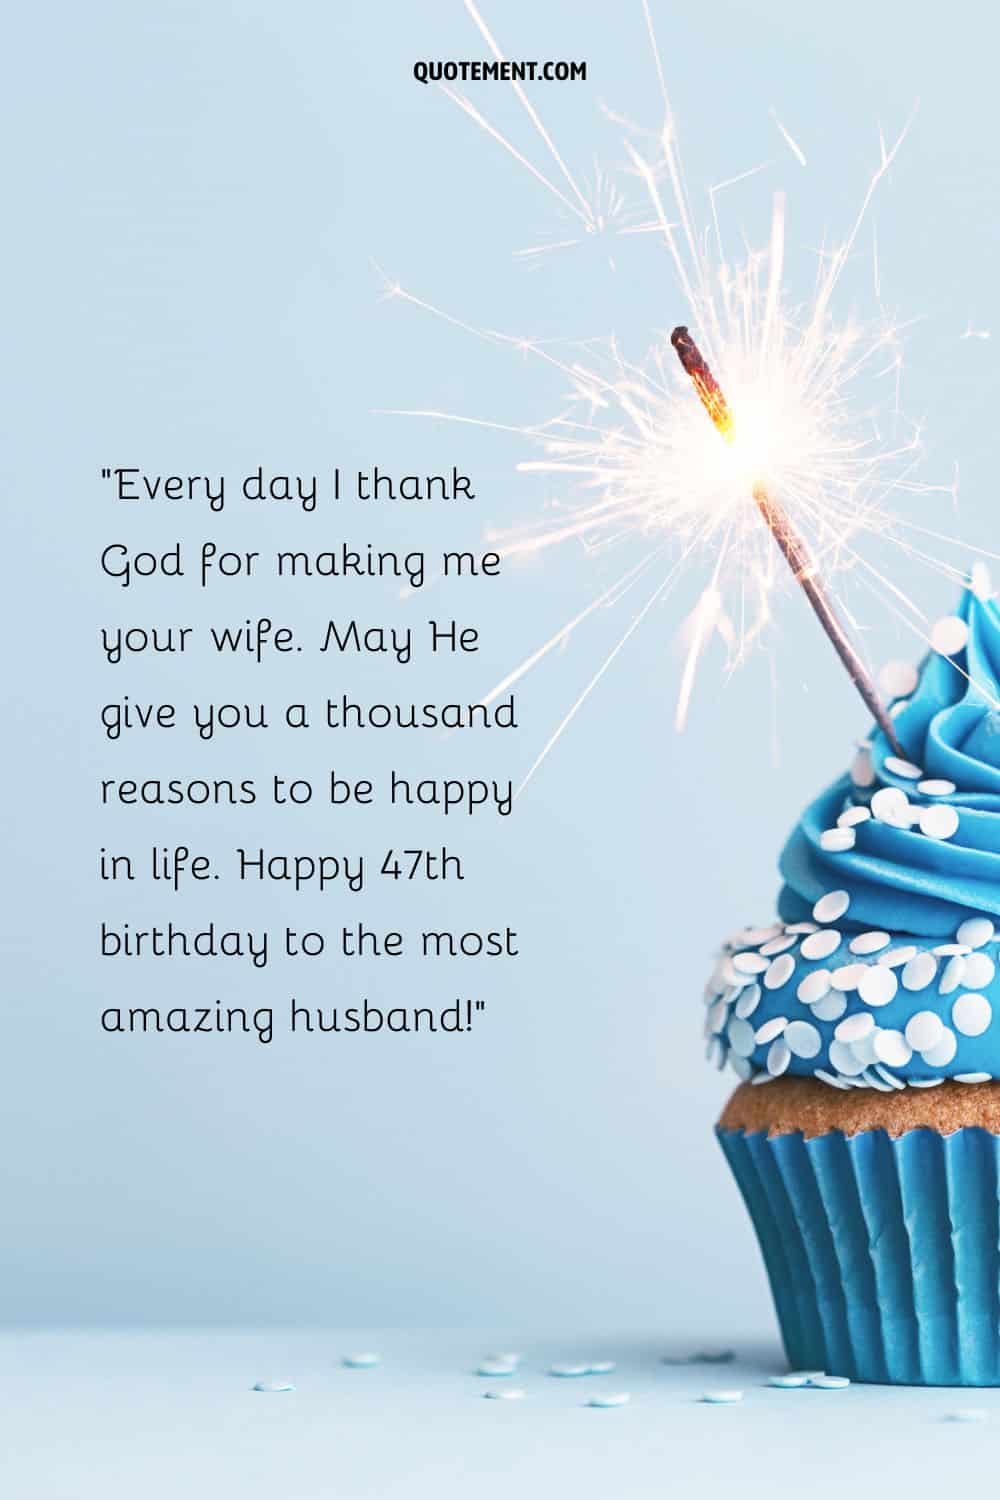 Heartwarming message for a husband who turns 47 and a blue birthday cupcake next to it
